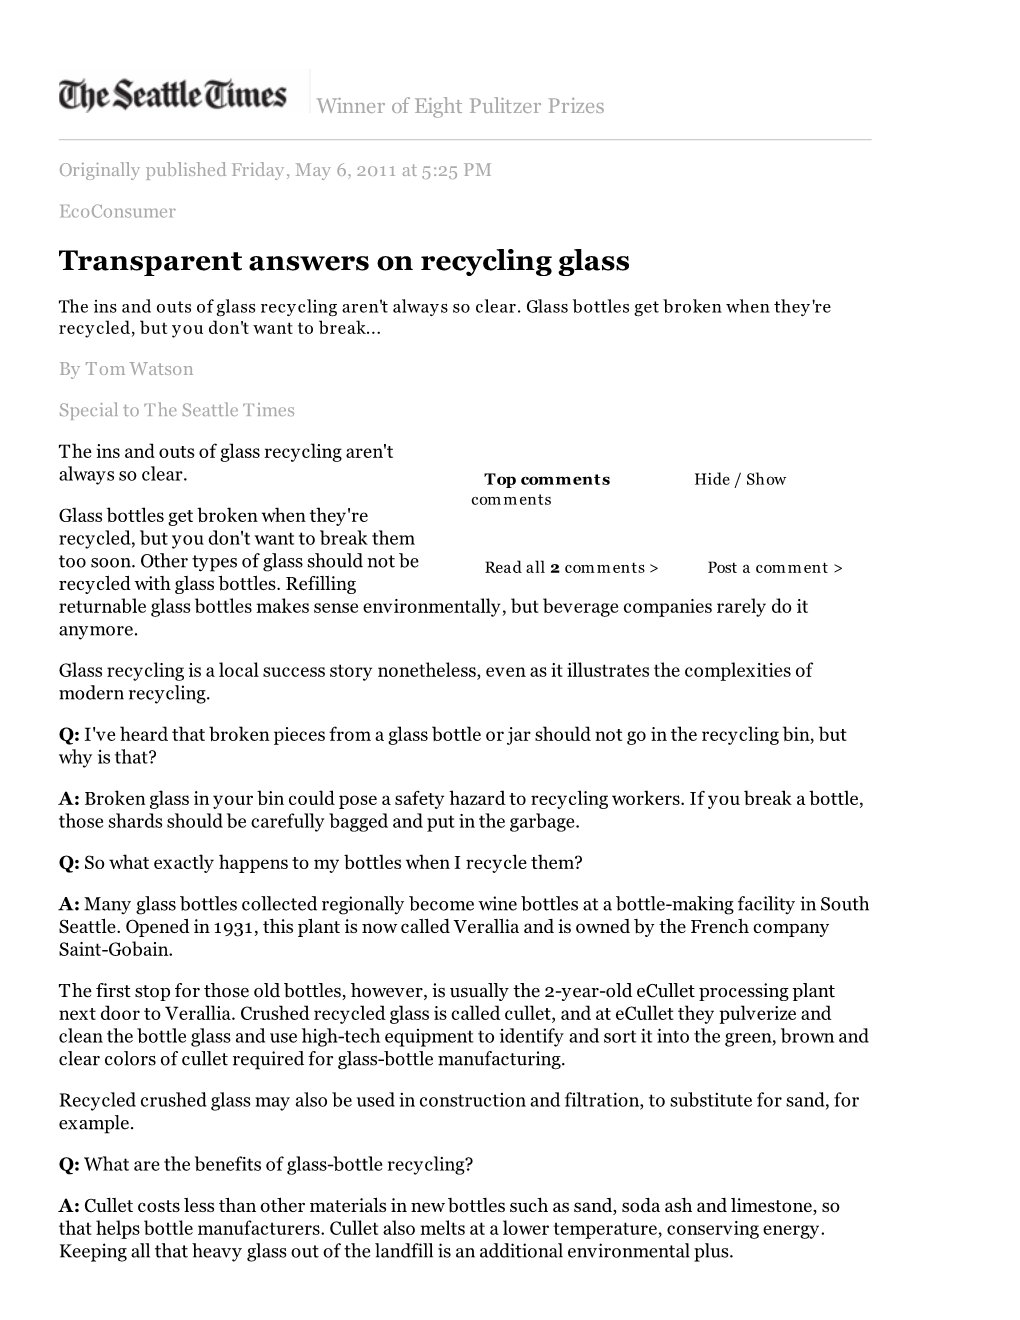 King County Ecoconsumer: "Transparent Answers on Recycling Glass," from the Seattle Times